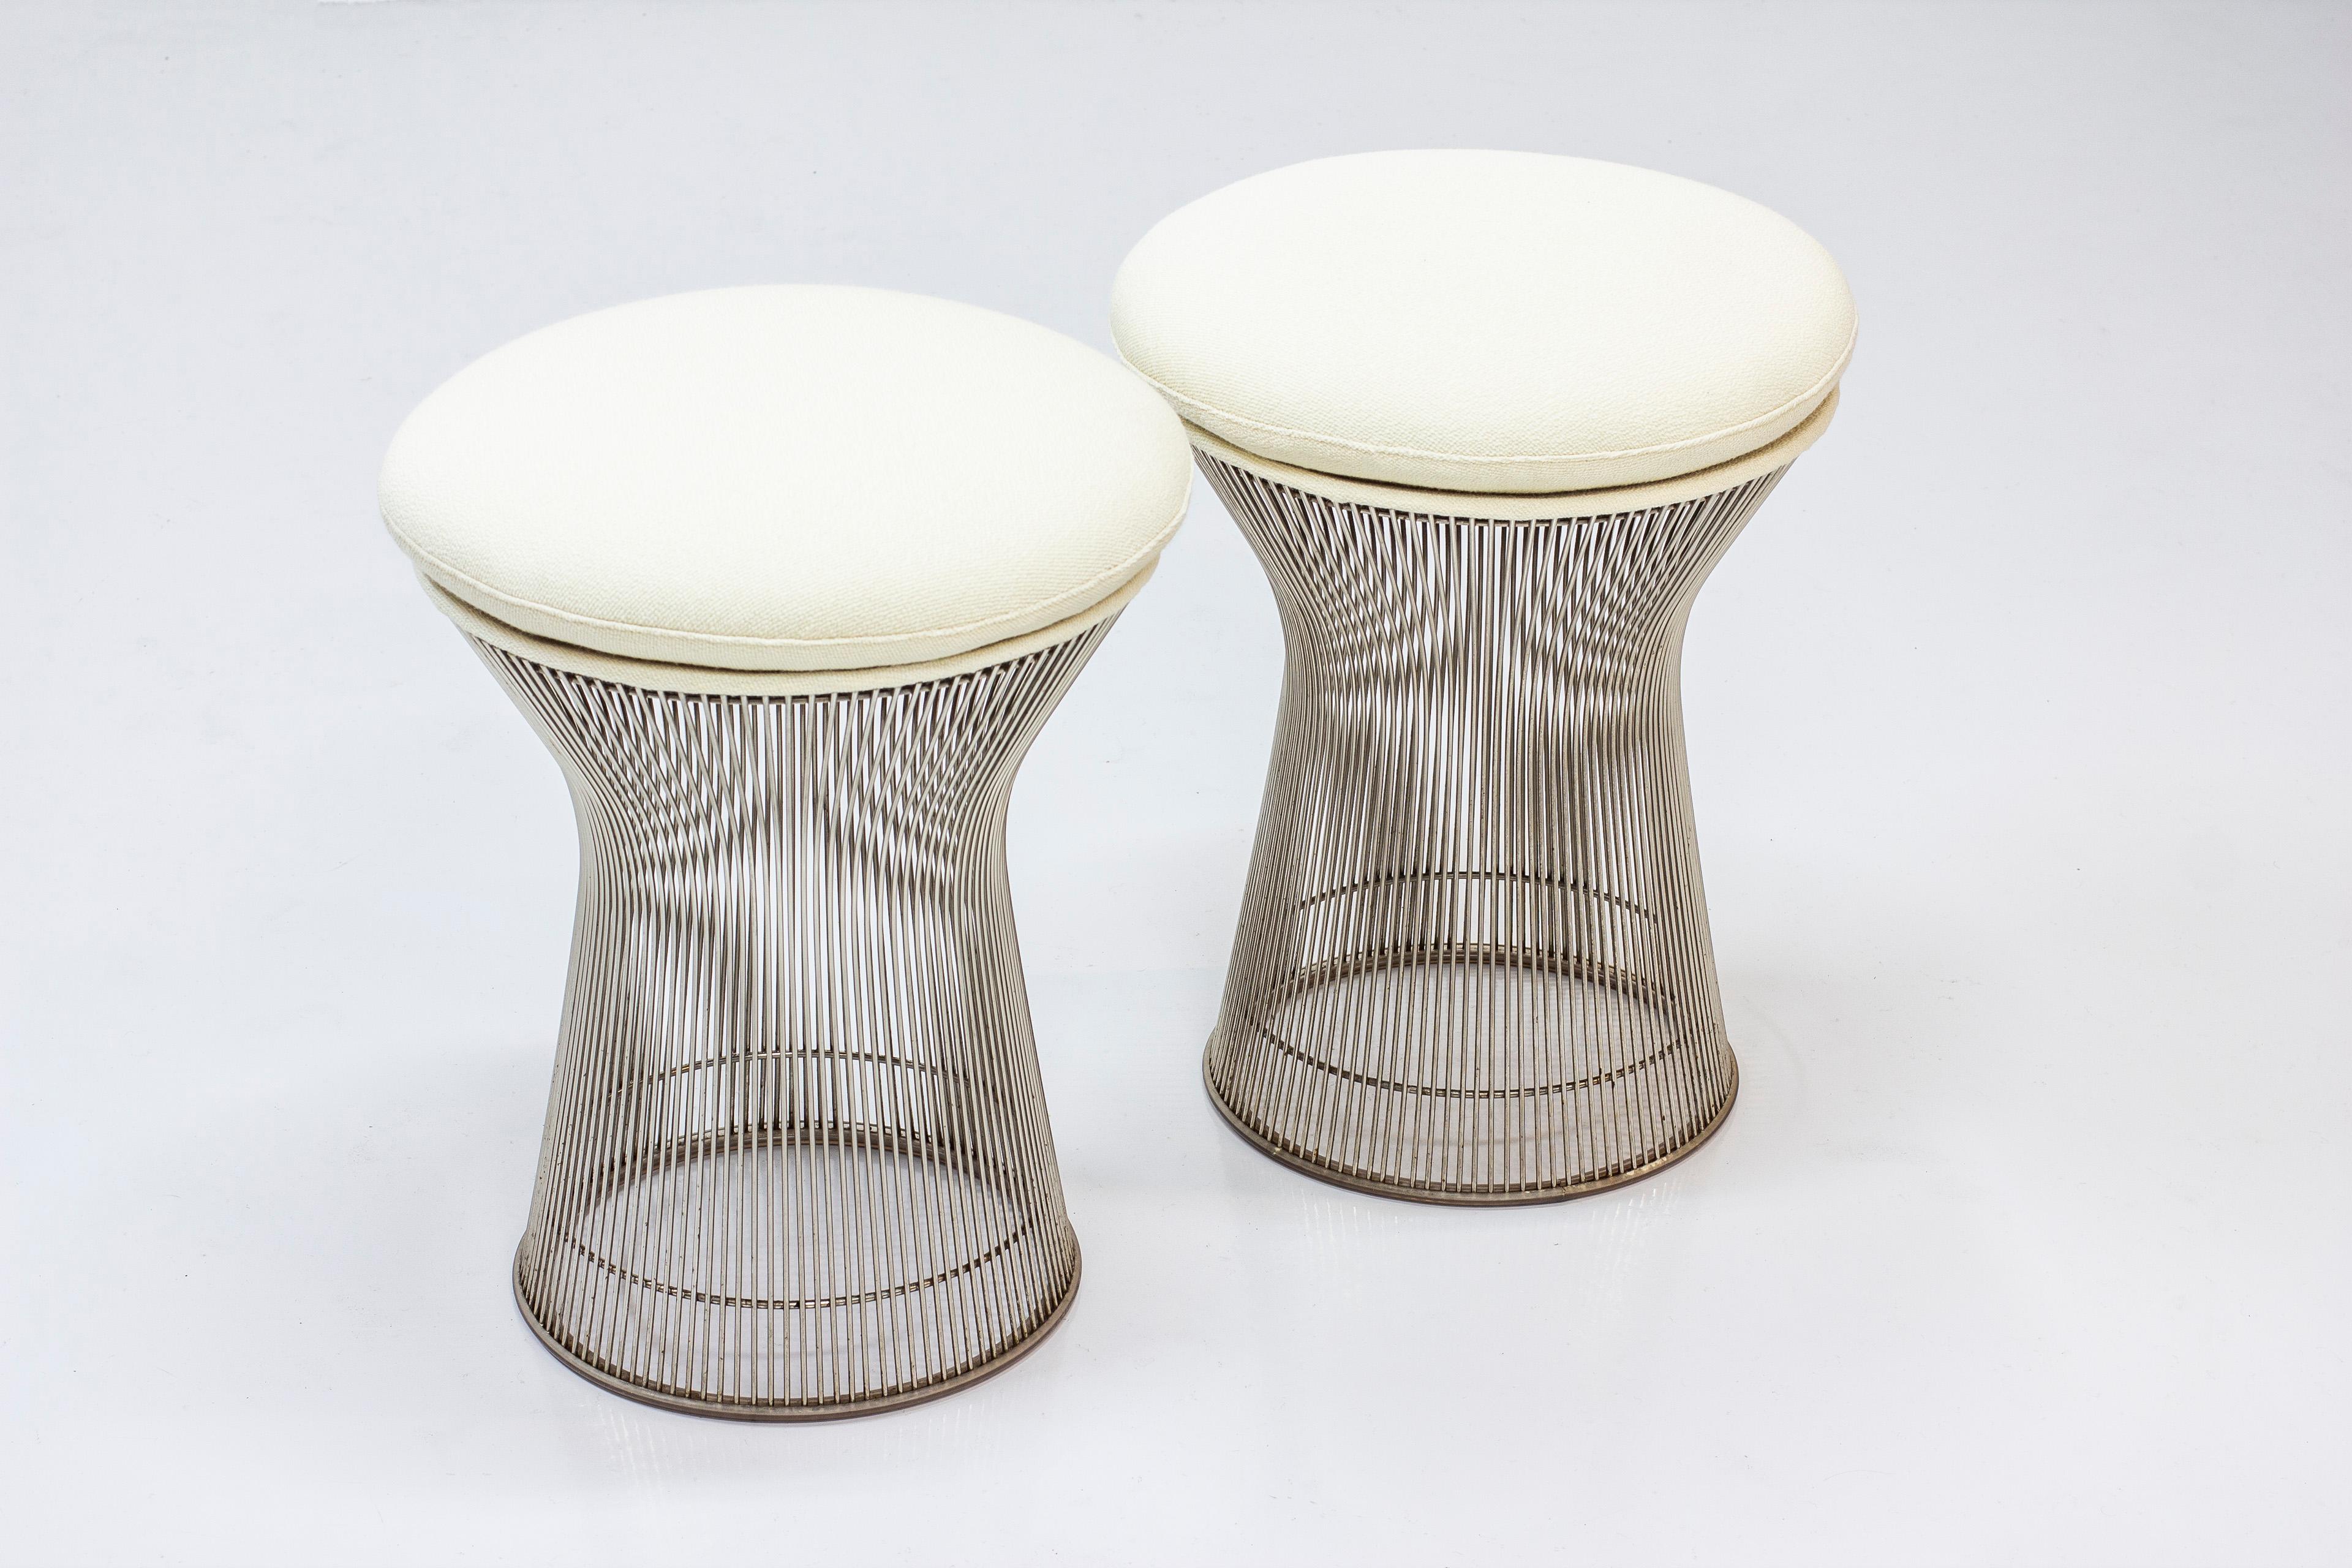 Pair of stools designed by Warren Platner. Designed in 1966 and produced by Knoll. Made from chromed steel bars, fiberglass, foam seats and new wool upholstery 